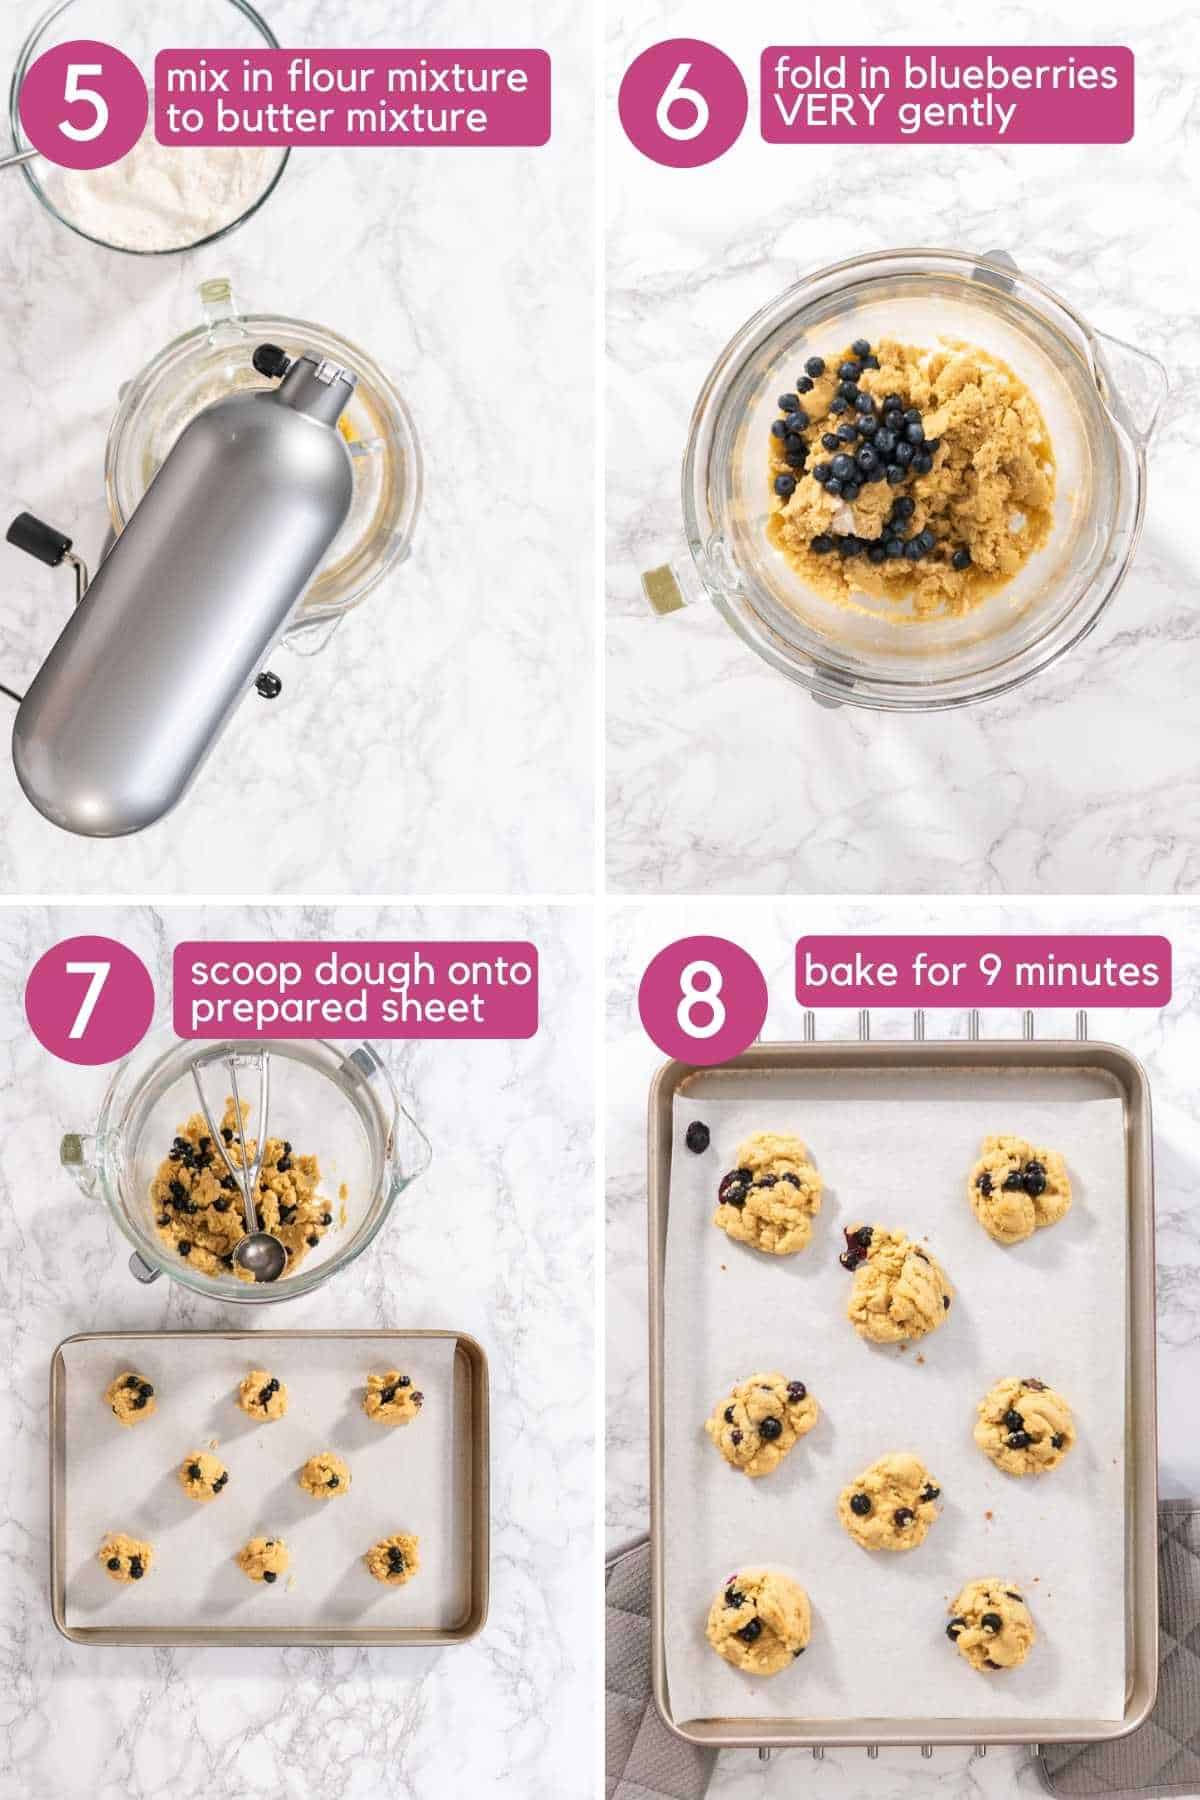 Scoop cookie dough onto prepared sheet and bake blueberry lemon cookies for nine minutes.